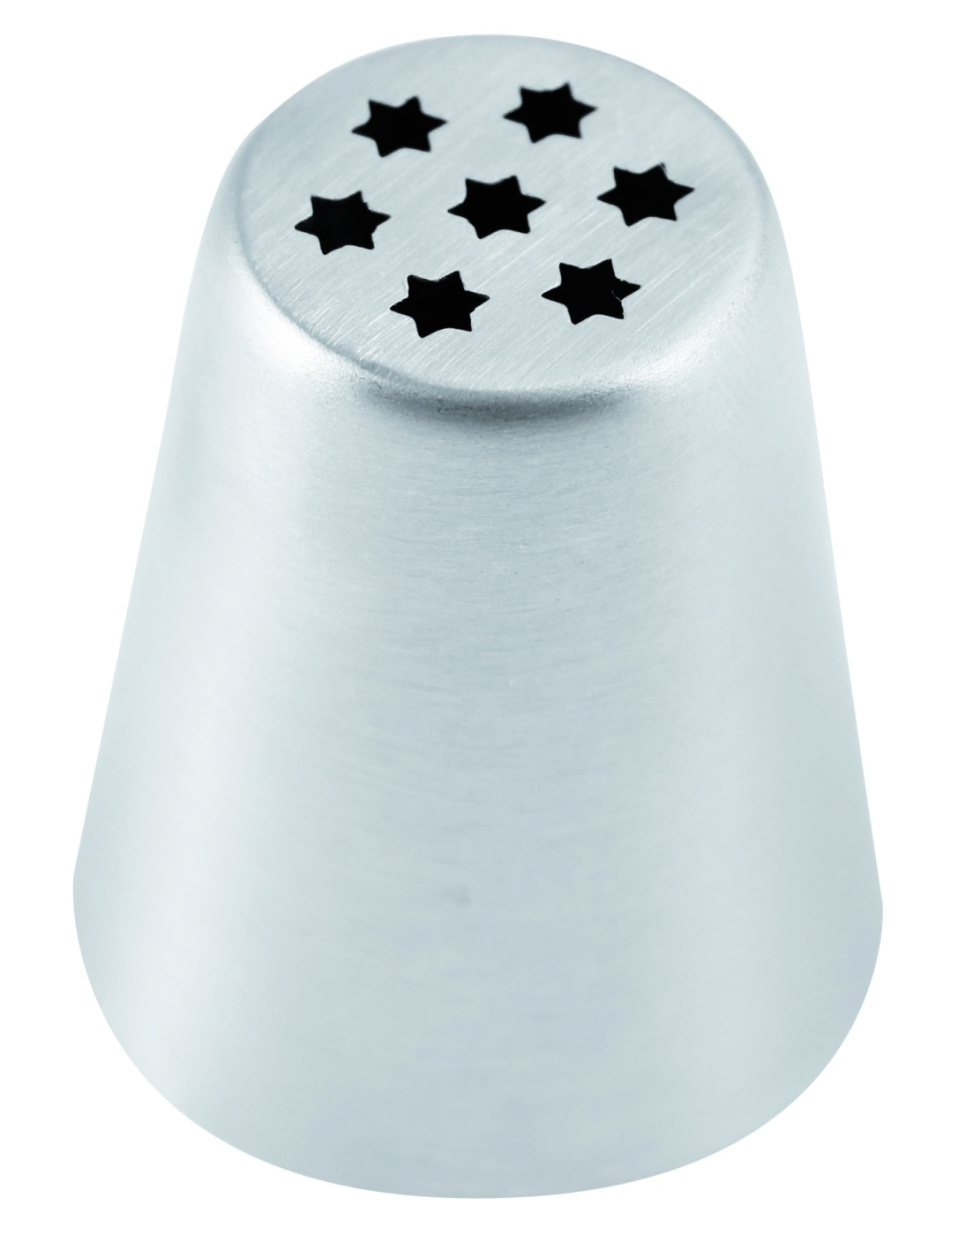 Star nozzle, BX0001 - Martellato in the group Baking / Baking utensils / Piping & nozzles at KitchenLab (1710-19041)